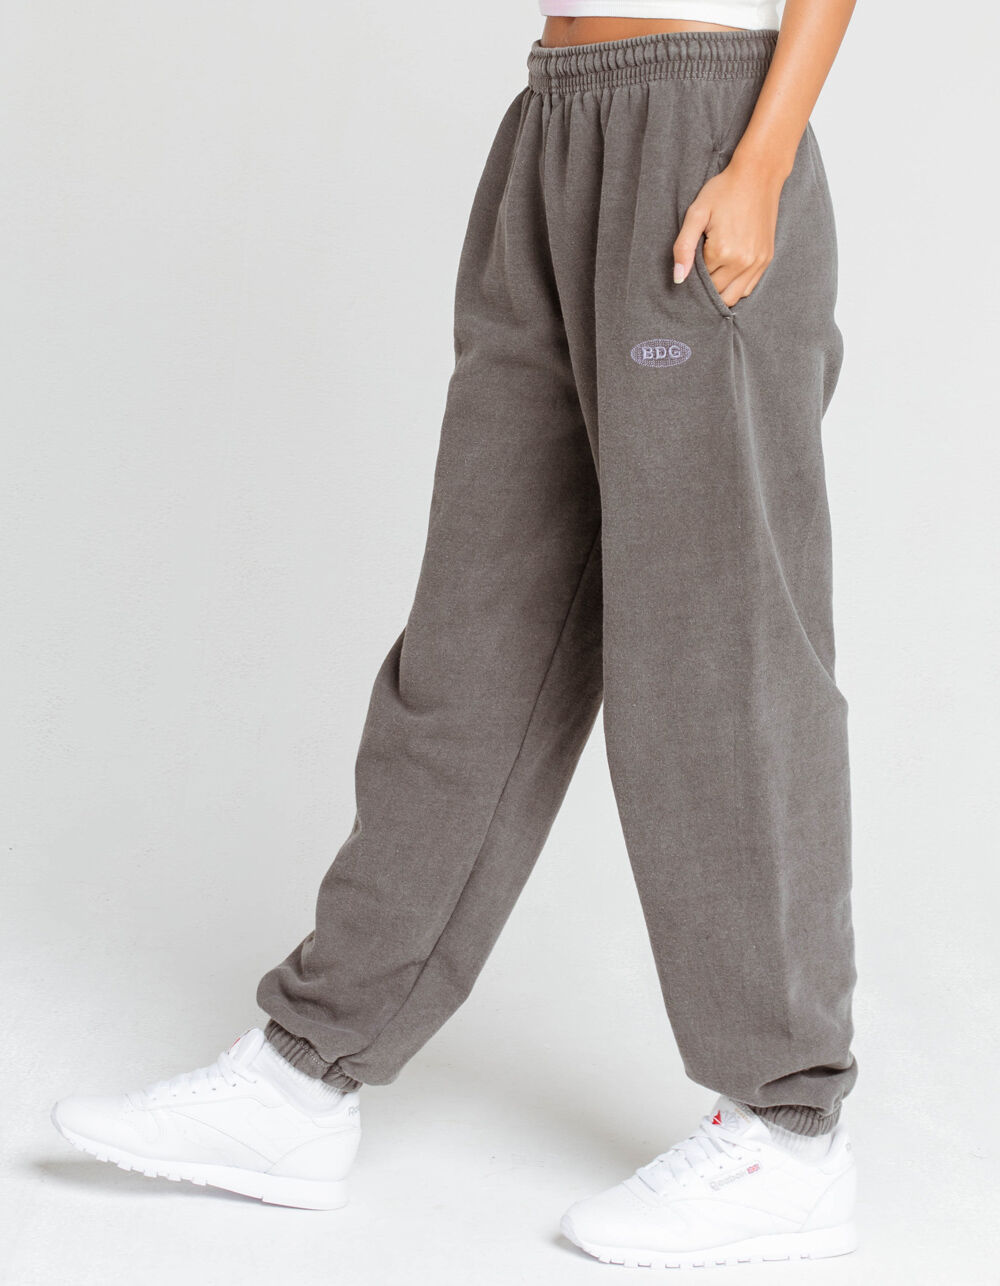 BDG Urban Outfitters Womens Charcoal Jogger Pants - CHARCOAL | Tillys